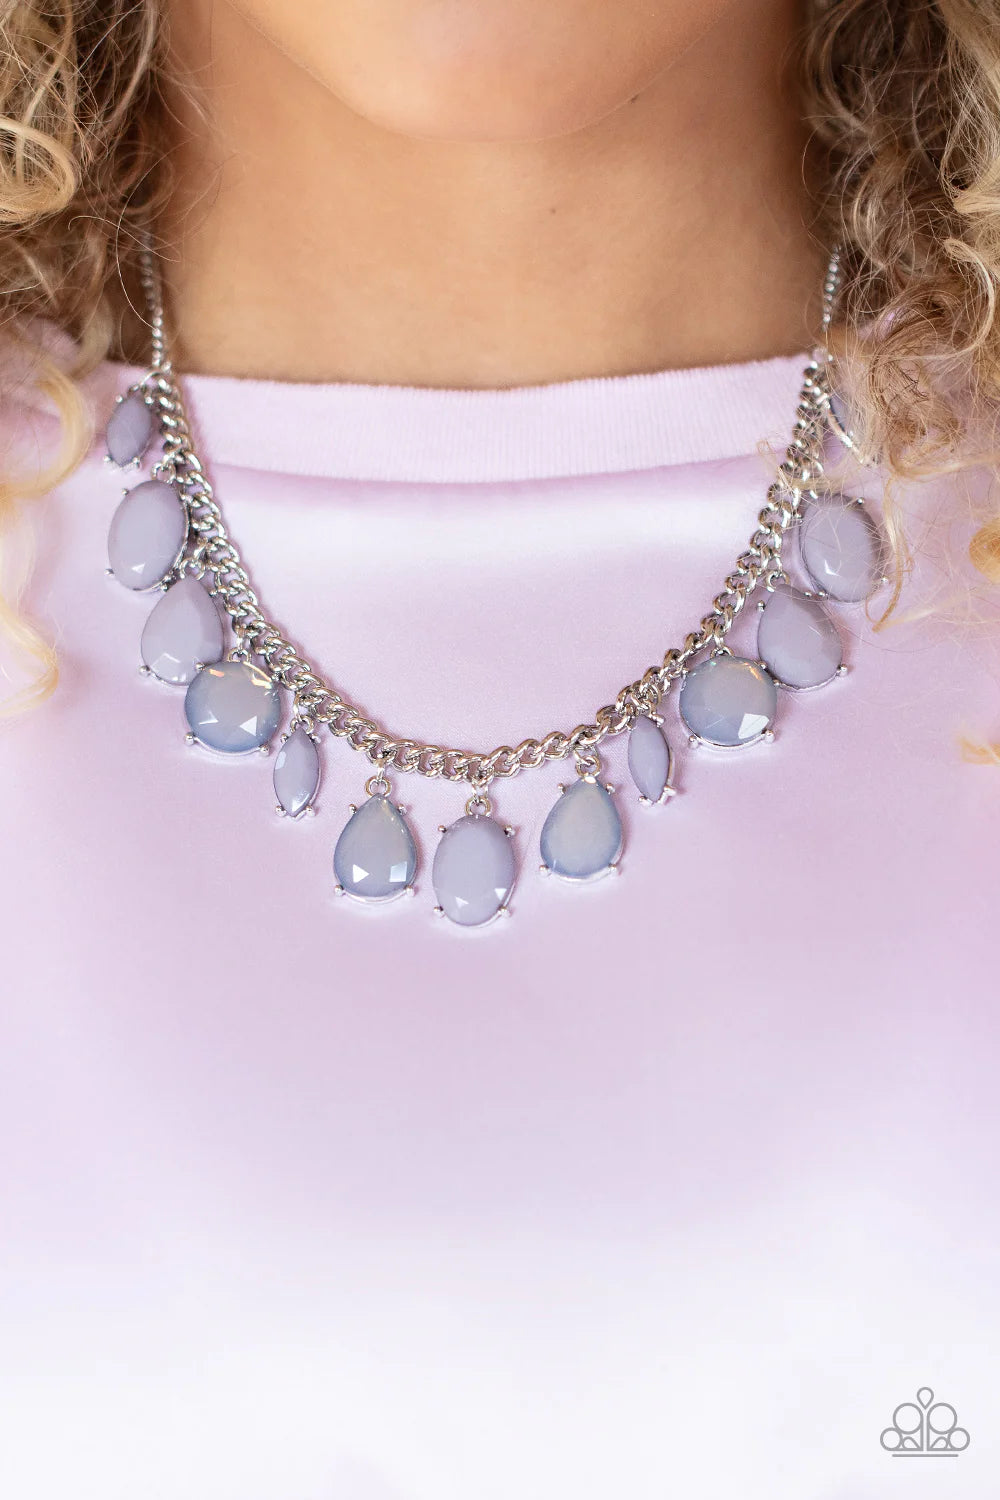 Paparazzi Accessories Fairytale Fortuity - Silver Featuring oval, round, teardrop, and marquise cuts, a fanciful collection of opaque and translucent Gray Lilac beads sways from a bold silver chain. The faceted beads are set in silver prong settings, givi